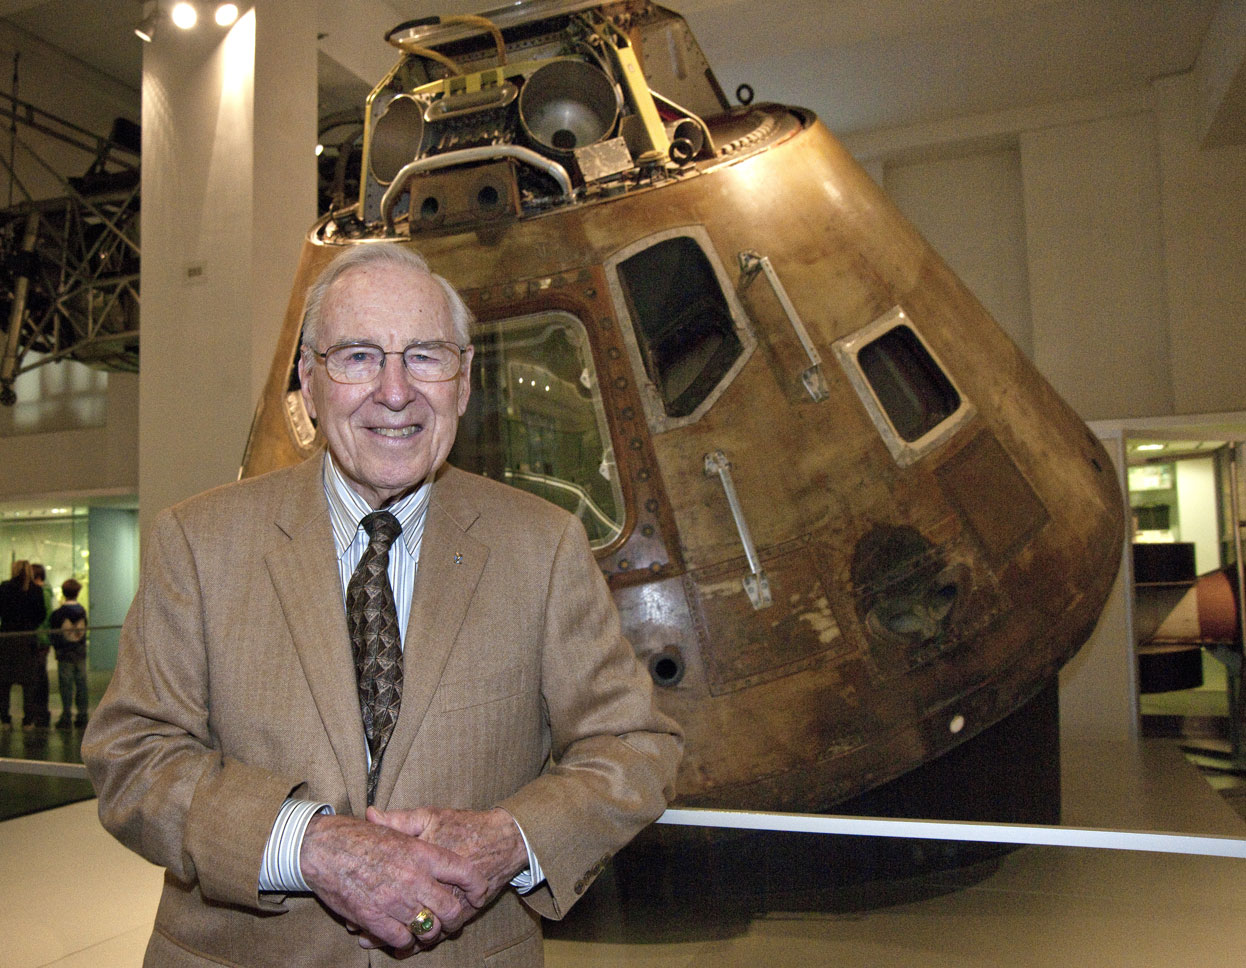 Apollo 8 & 13 astronaut Jim Lovell at the Science Museum.